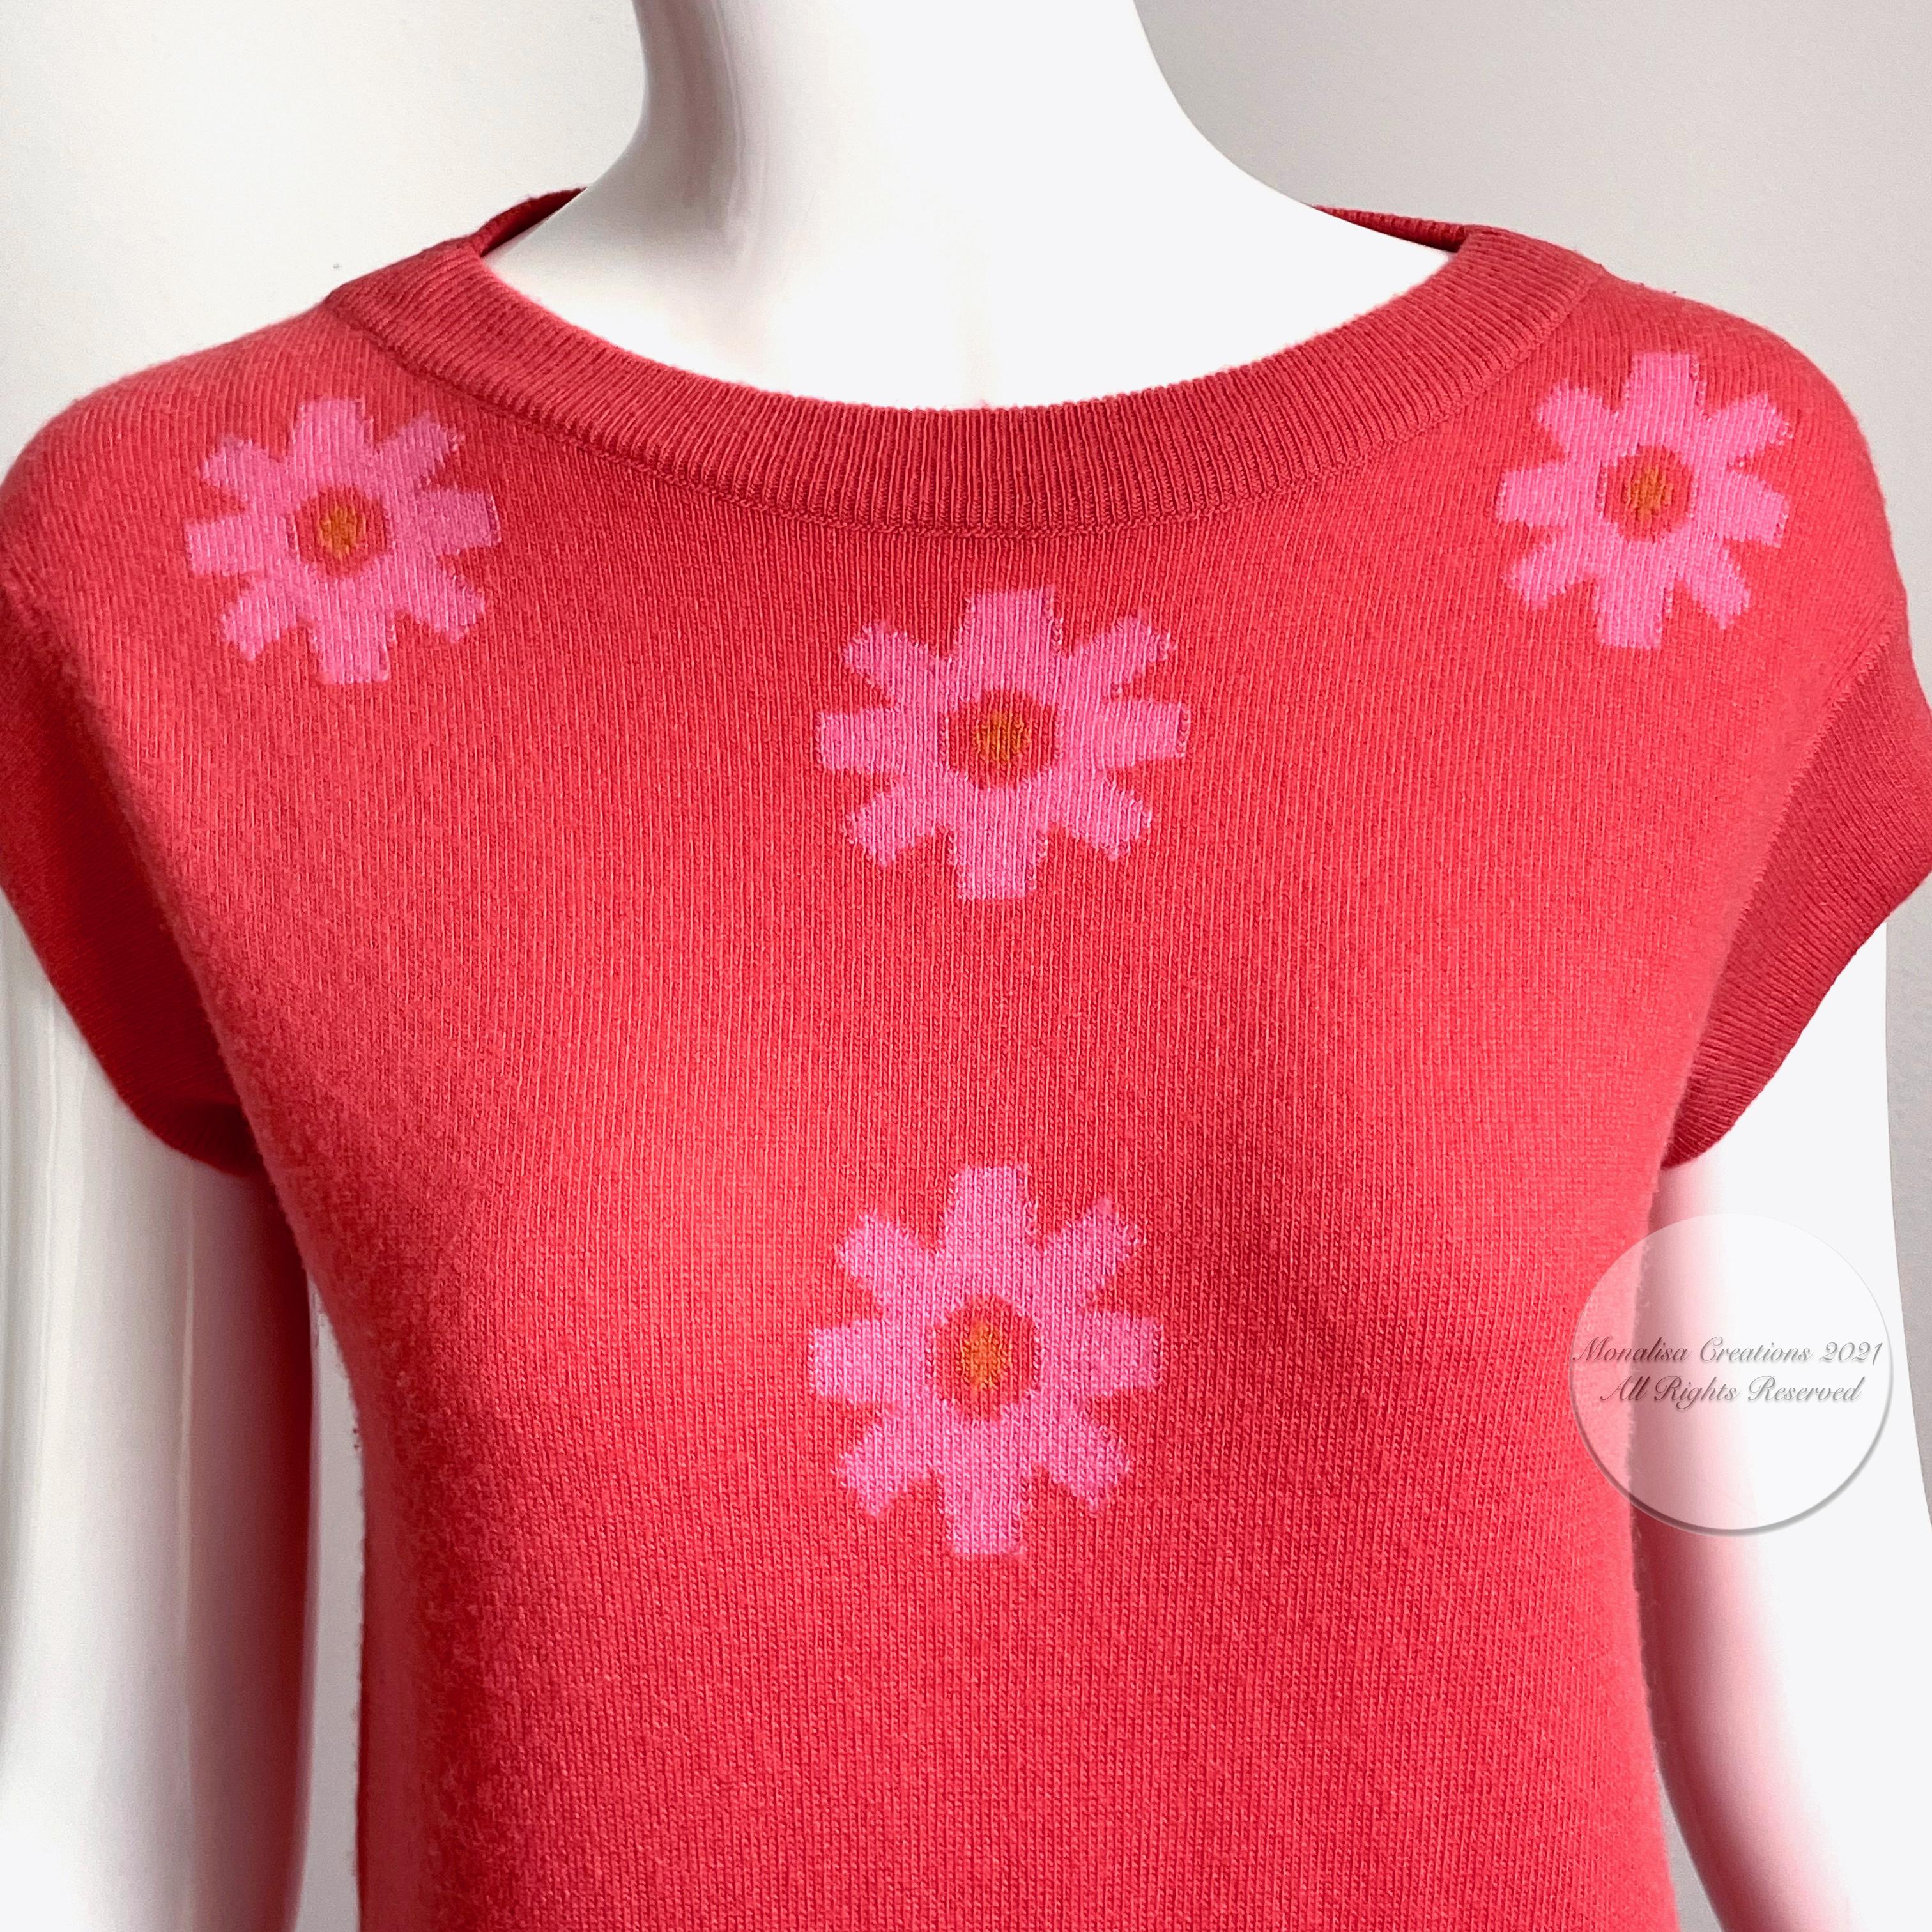 Fabulous vintage 60s Bonnie Cashin pink cashmere dress, made in Scotland for Saks Fifth Avenue by Caerlee.  Made from an incredibly supple carnation pink knit, it features gorgeous Intarsia floral detailing at chest.  

Bonnie Cashin's designs exude